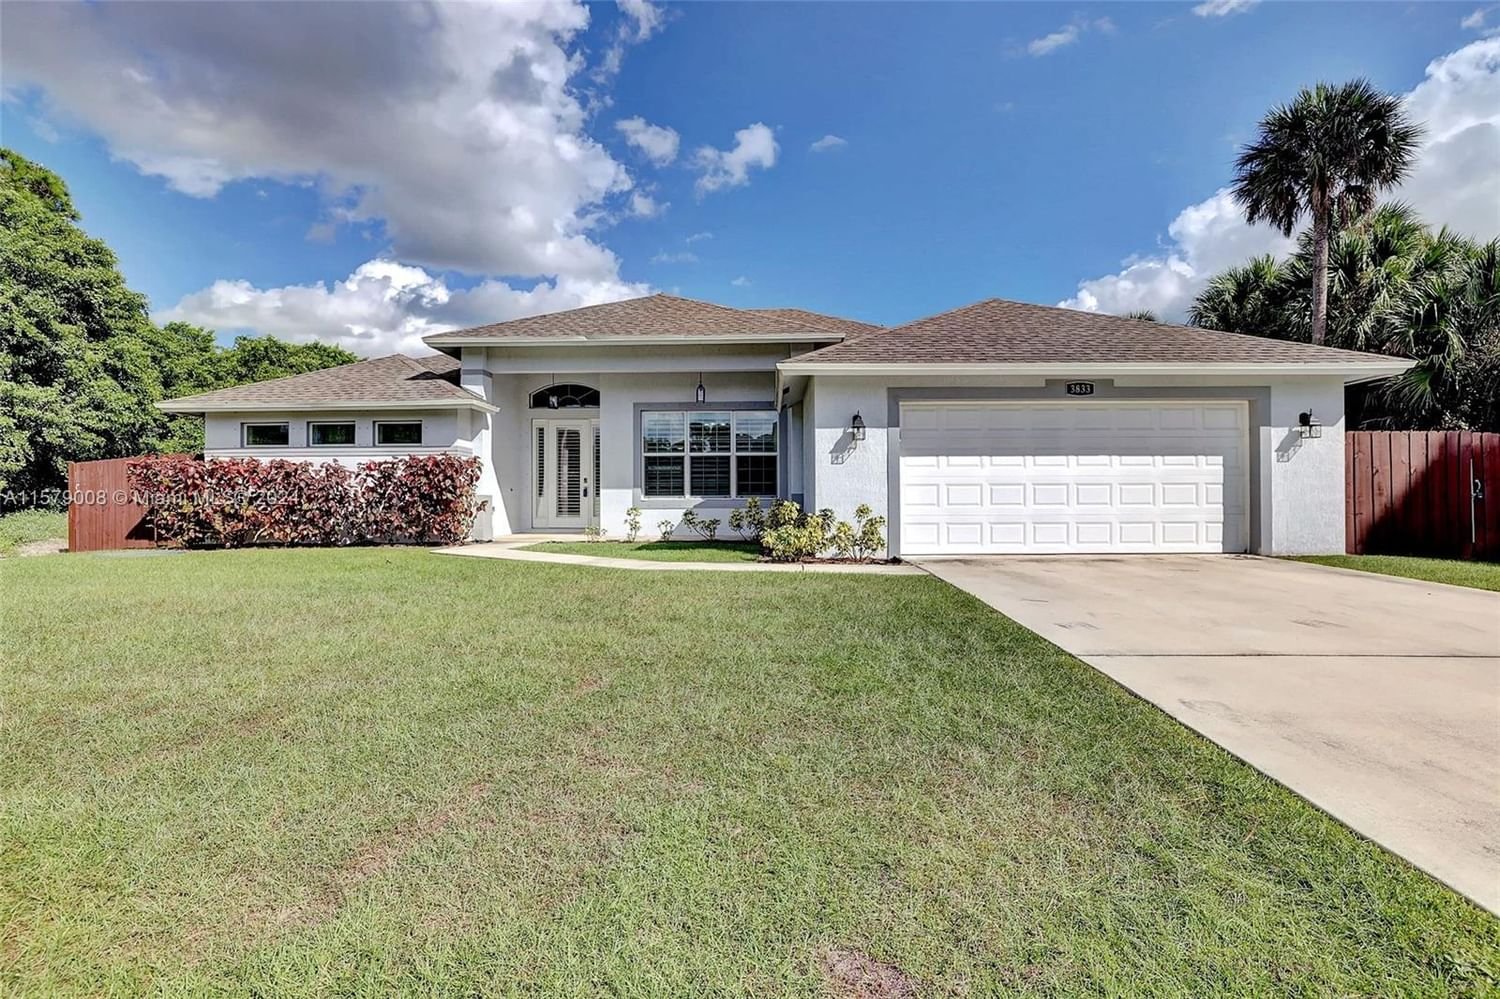 Real estate property located at 3833 Alice St, St Lucie County, PORT ST LUCIE SECTION 19, Port St. Lucie, FL